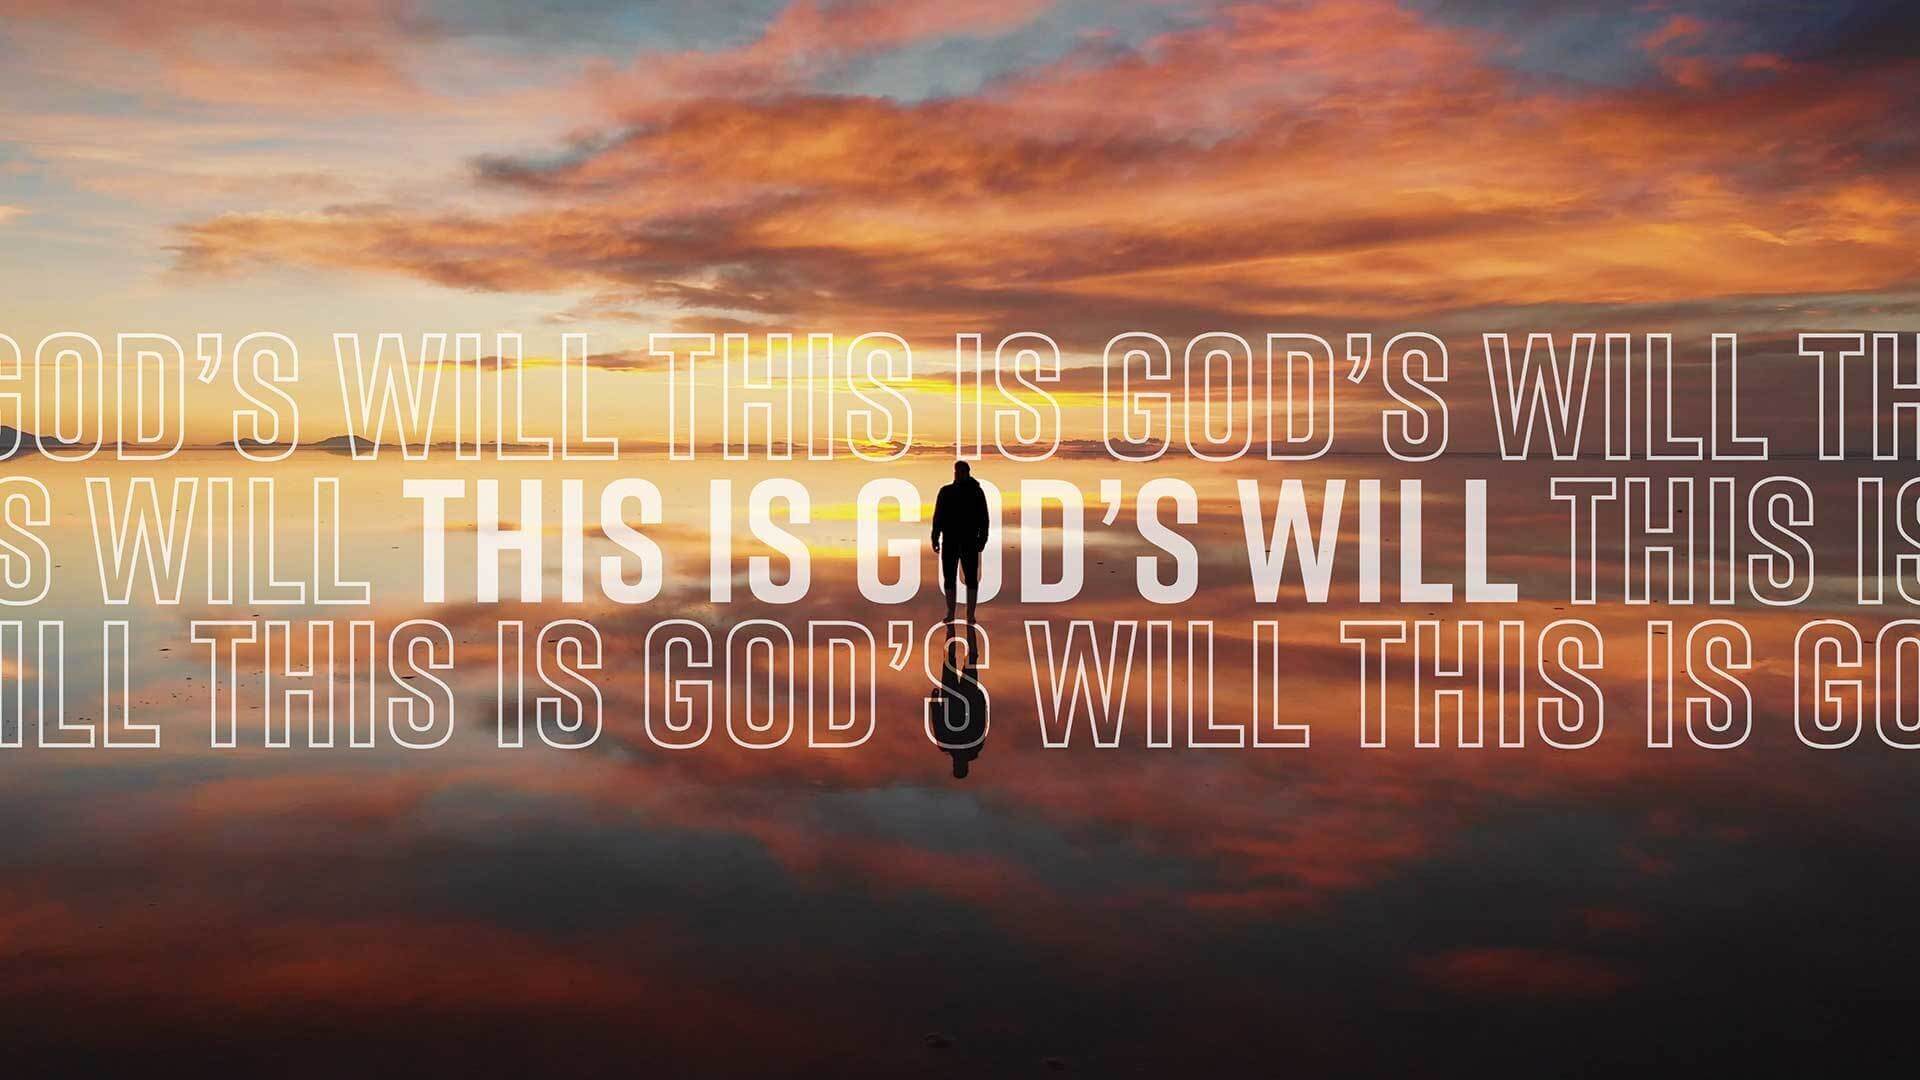 This is God's Will